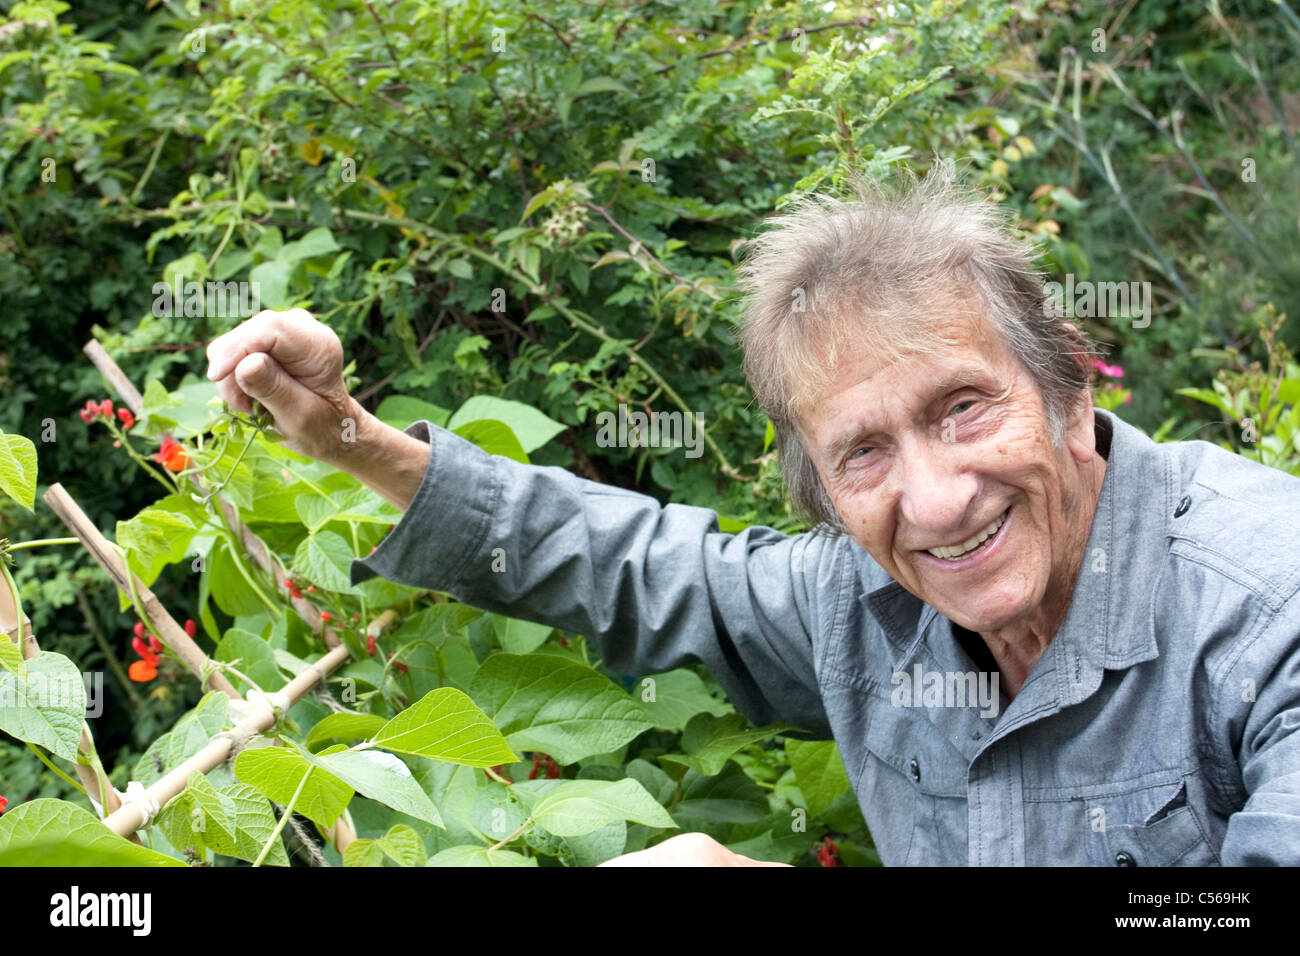 runner beans on the plant with man smiling Stock Photo